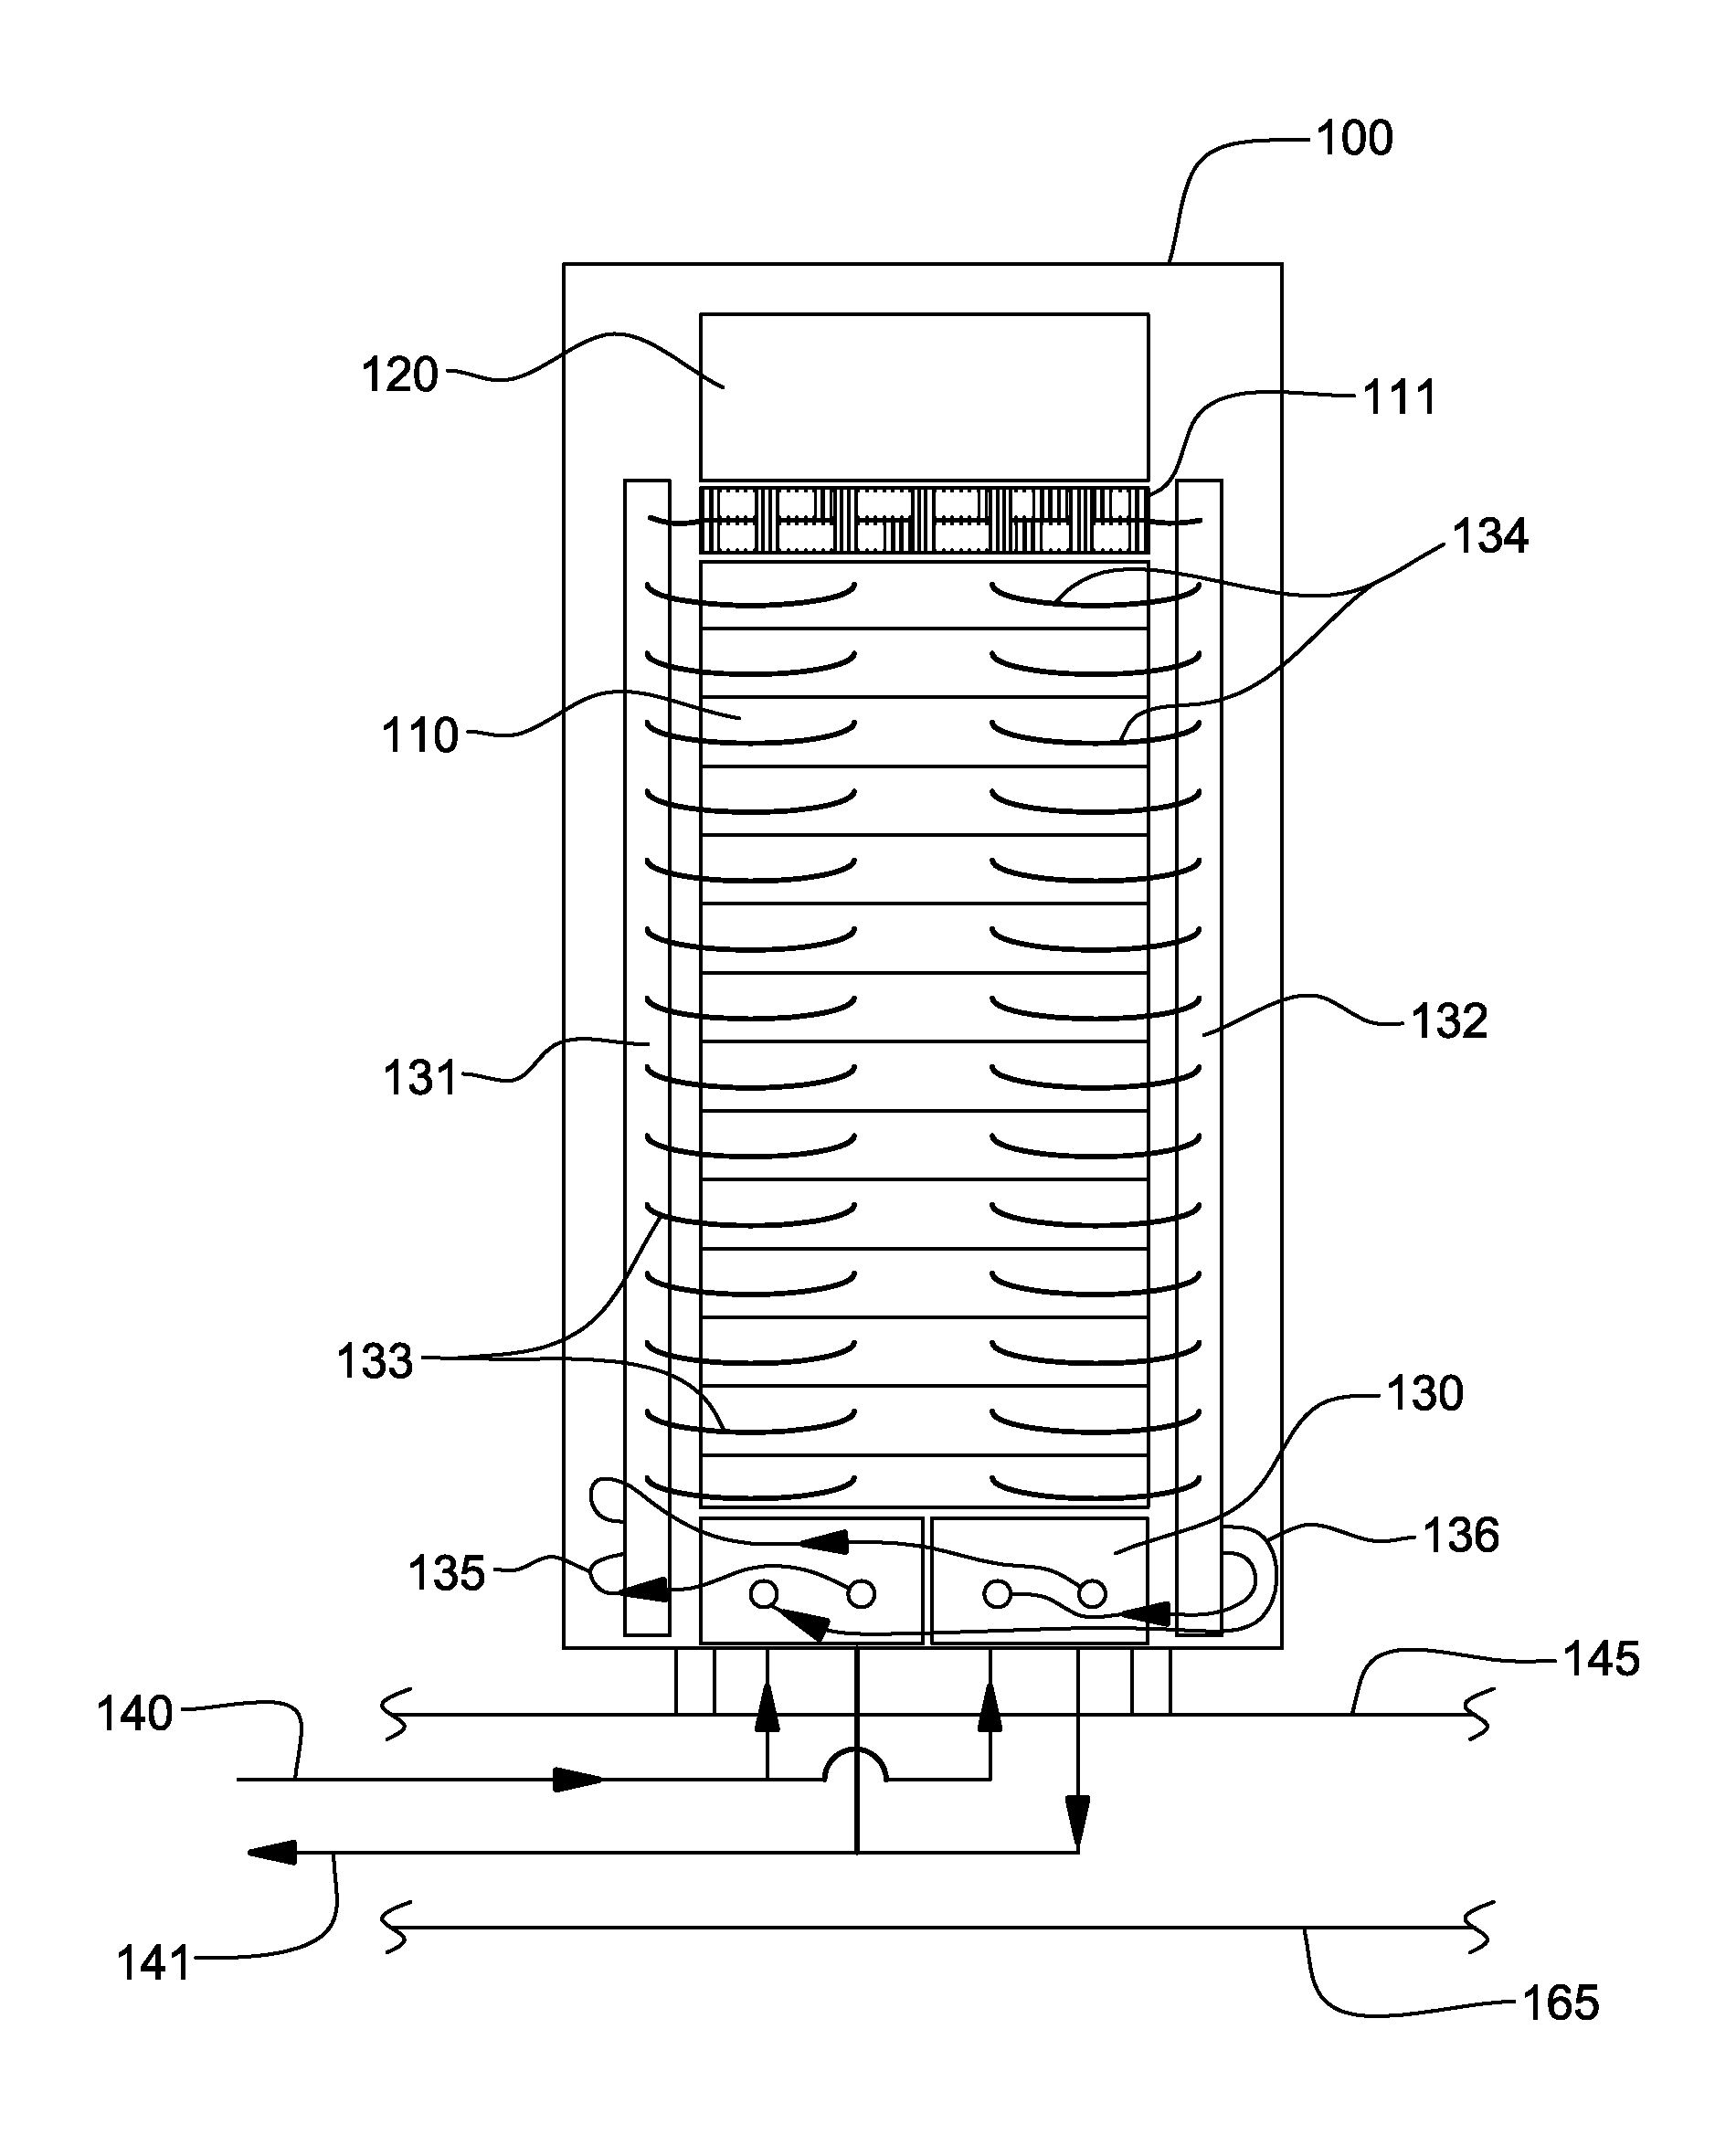 Flow boiling heat sink structure with vapor venting and condensing